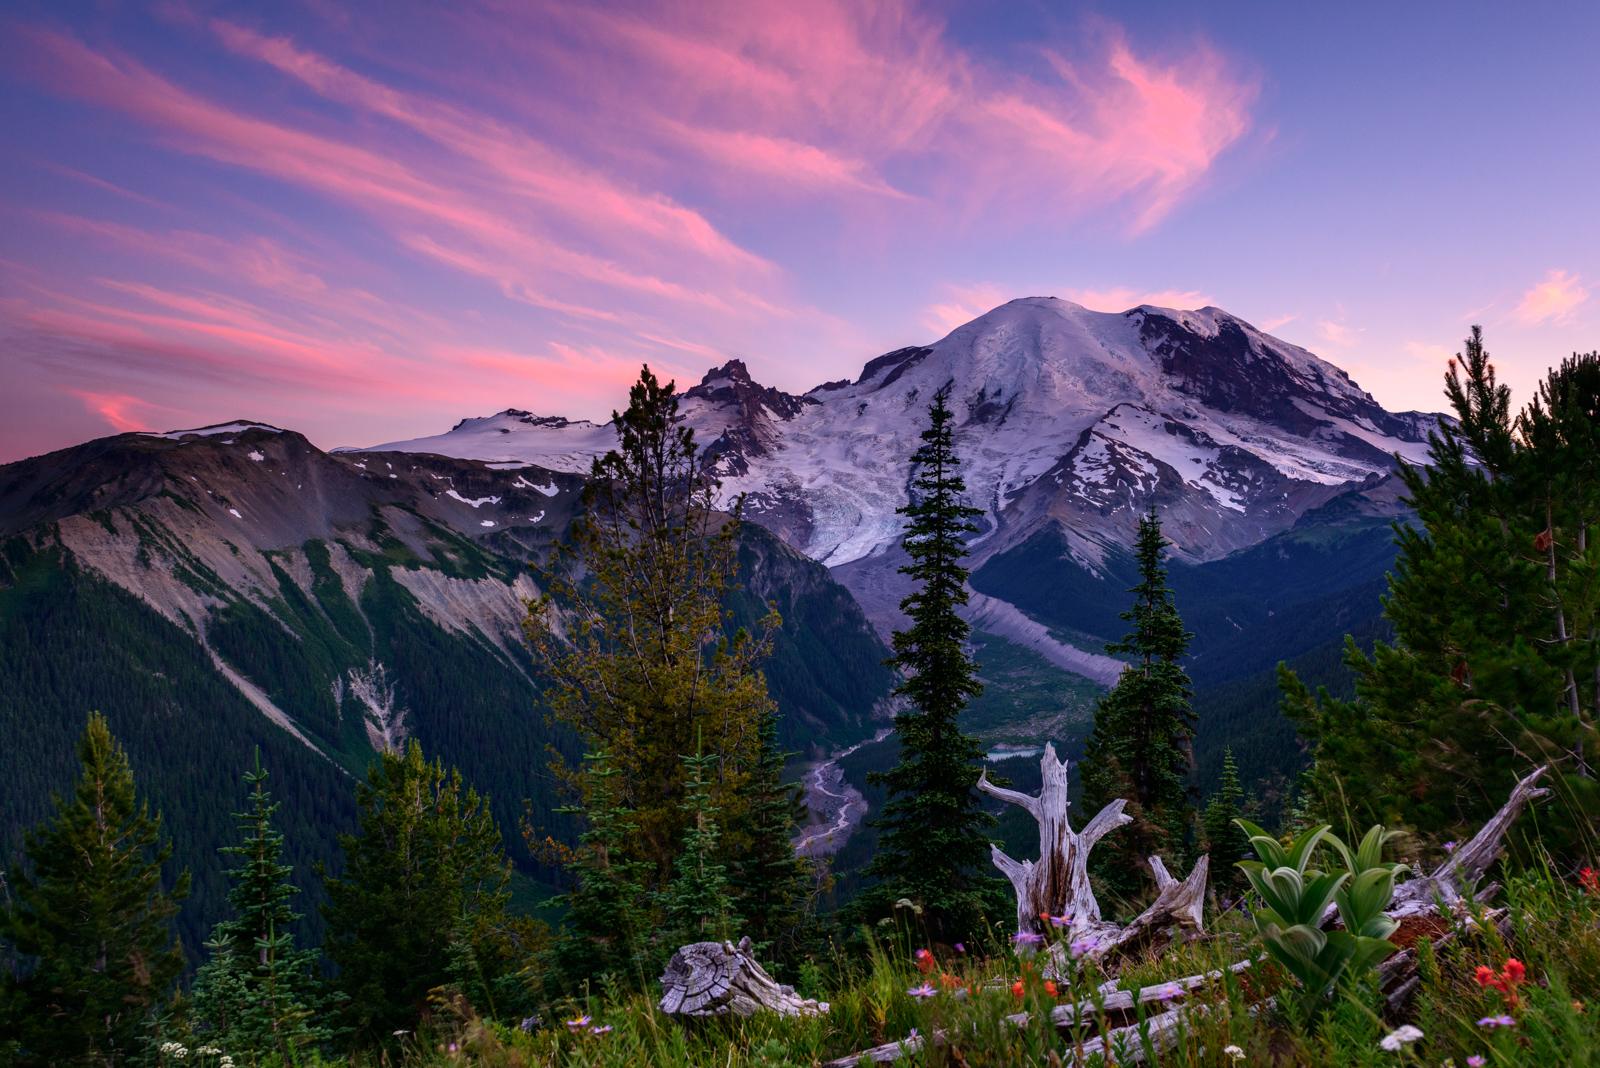 A purple and pink streaked sky over a mountain peak and forested valley.